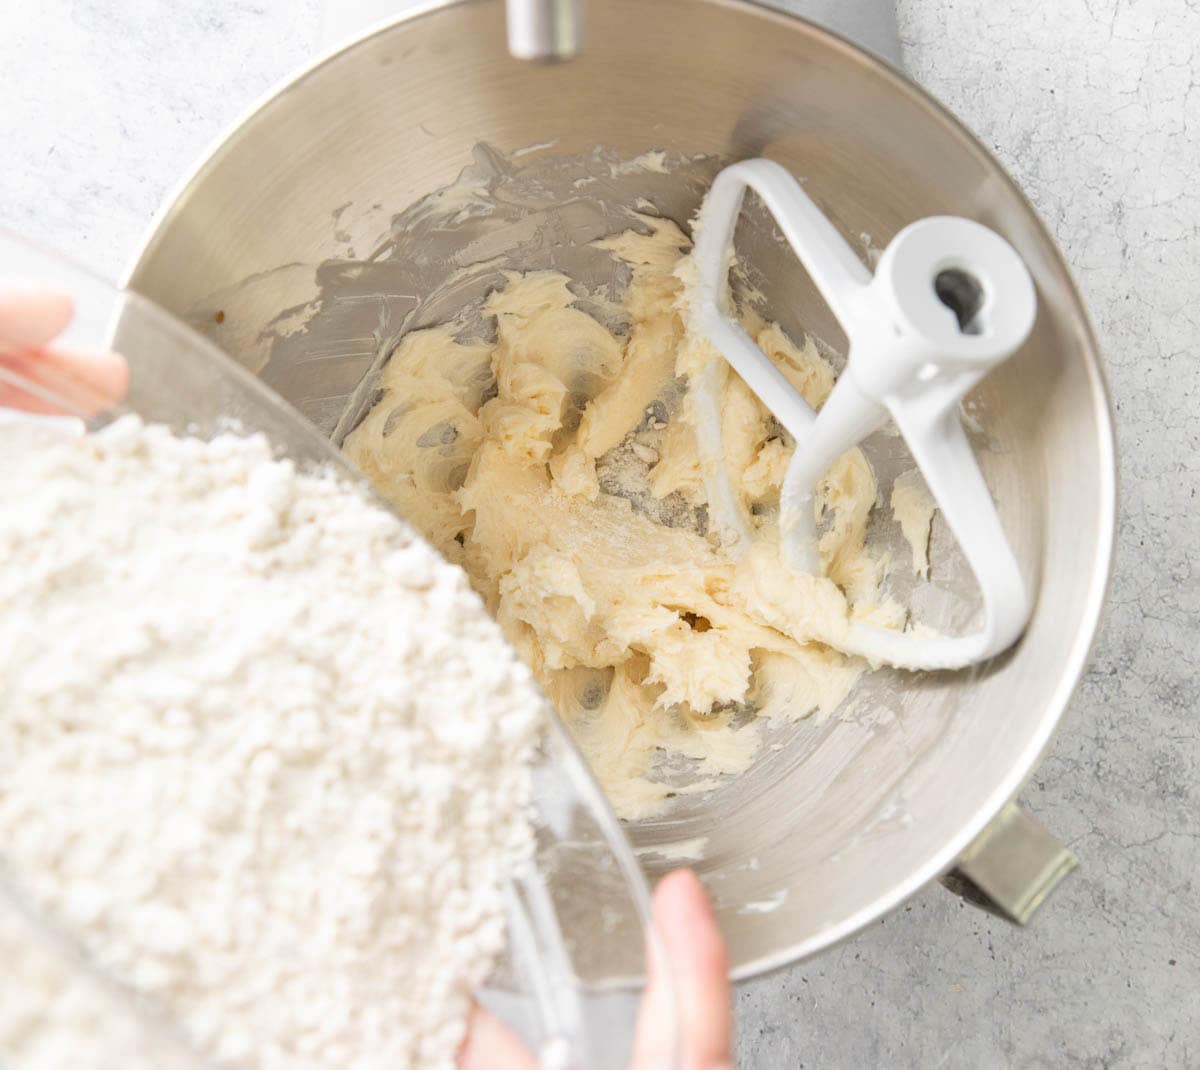 Adding the dry flour mixture into the stand mixer filled with creamed butter to create cookie dough